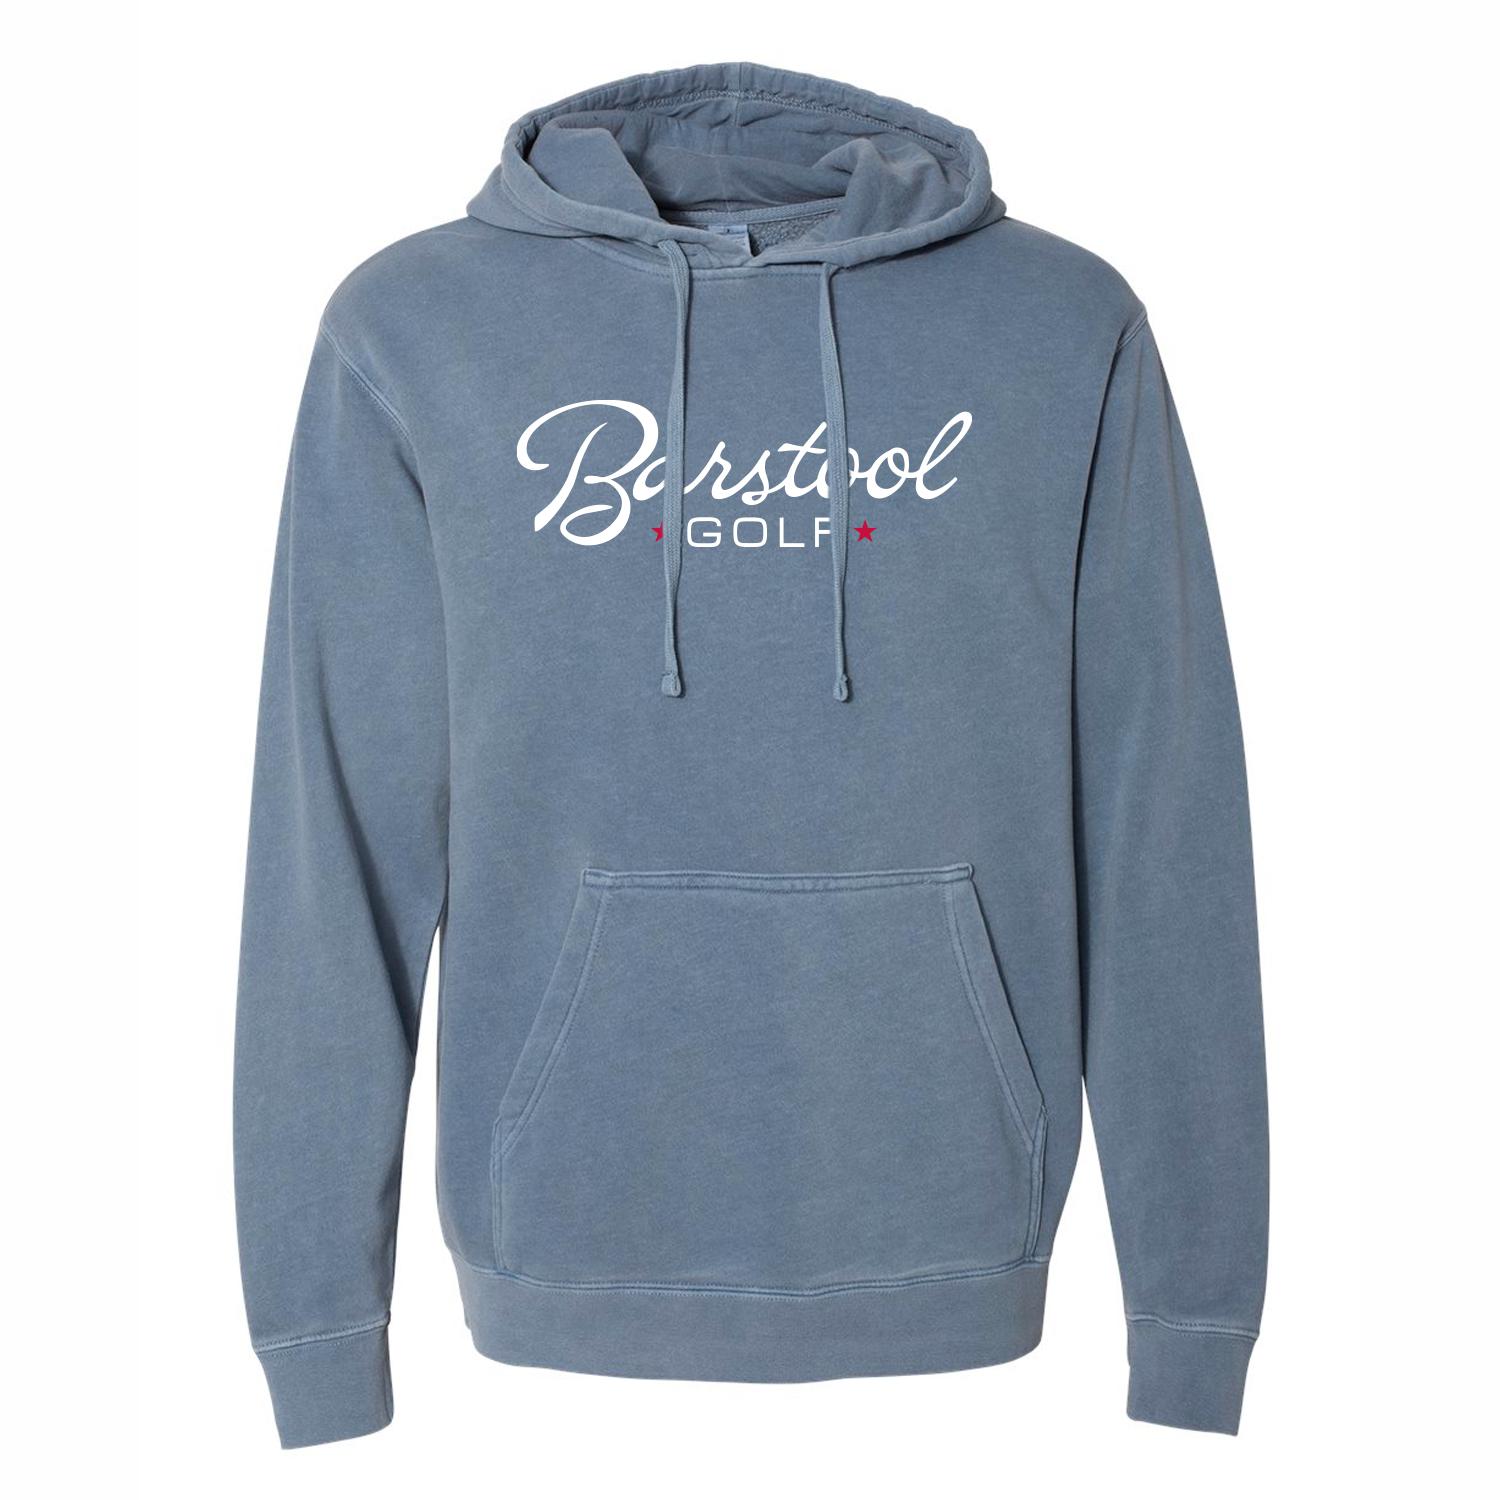 Barstool Golf Pigment Dyed Hoodie-Fore Play Hoodies, Clothing & Merch ...